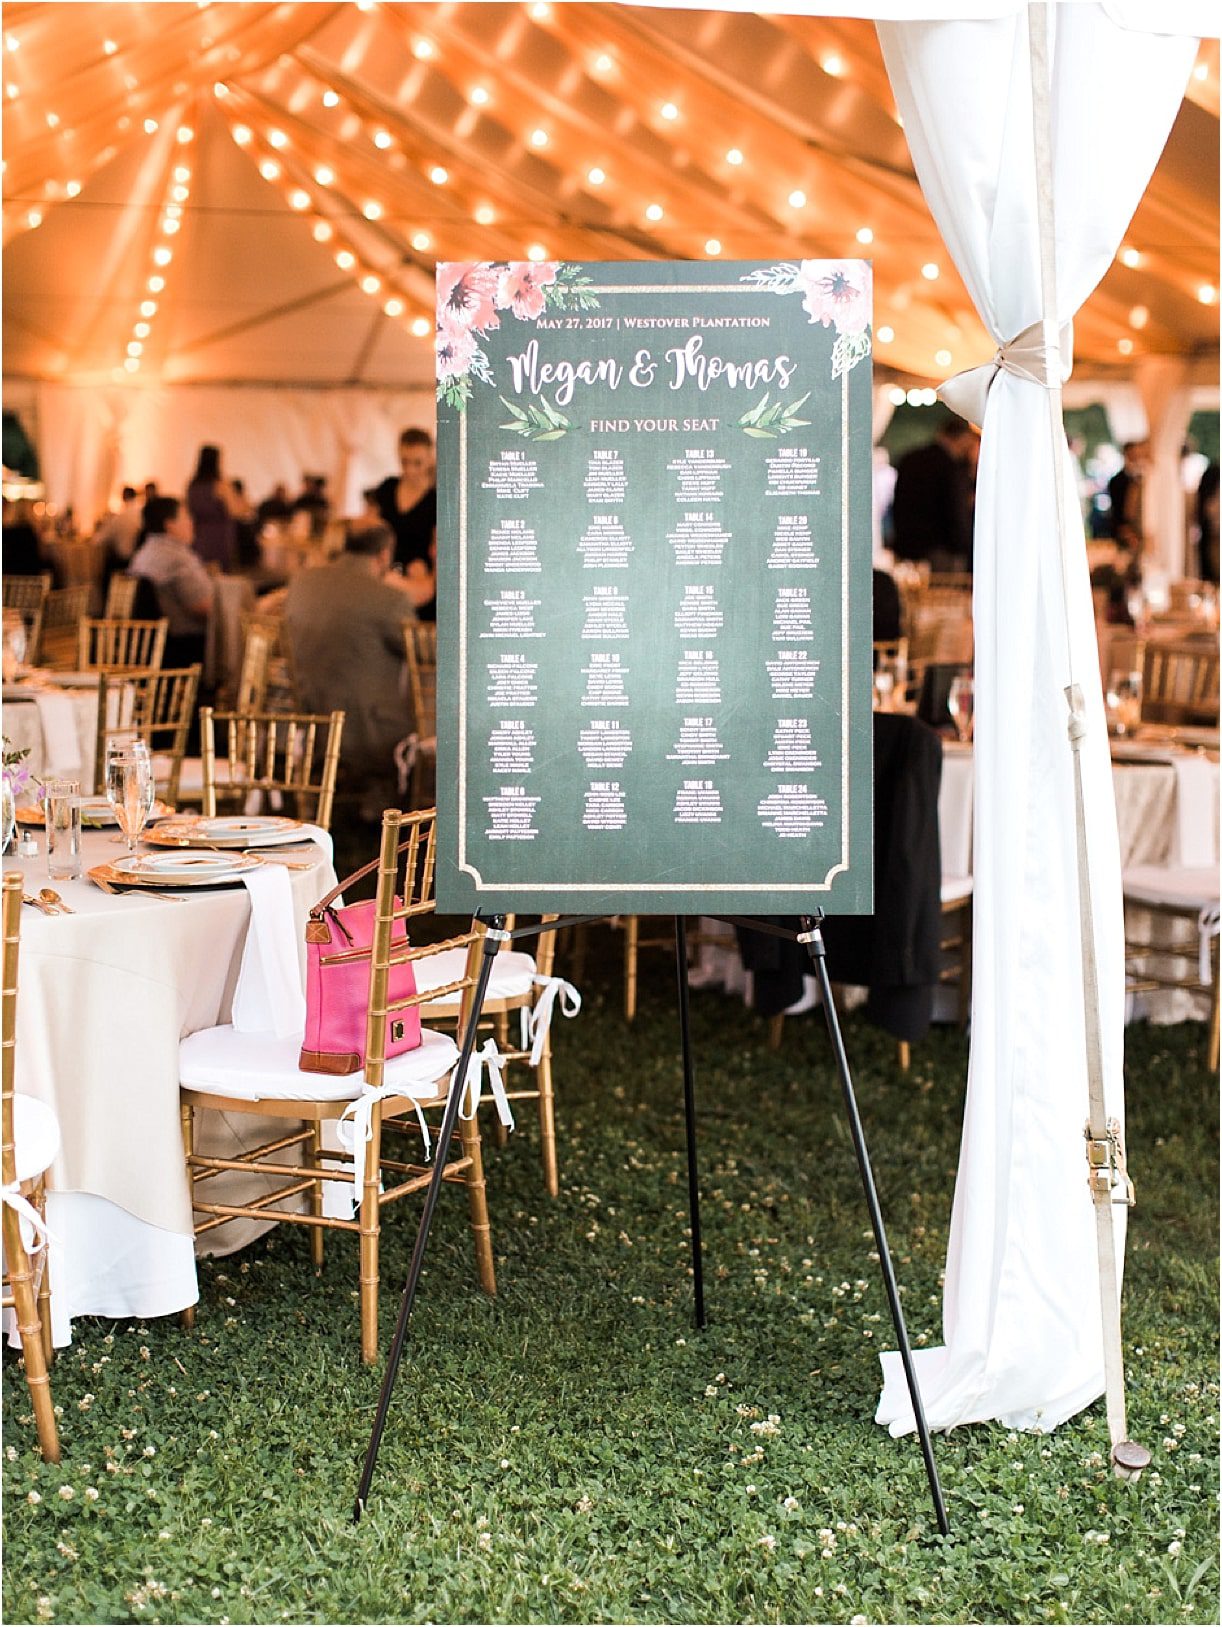 Historic Virginia Plantation Wedding as seen on Hill City Bride Blog by Rebekah Emily Photography - seating chart, reception